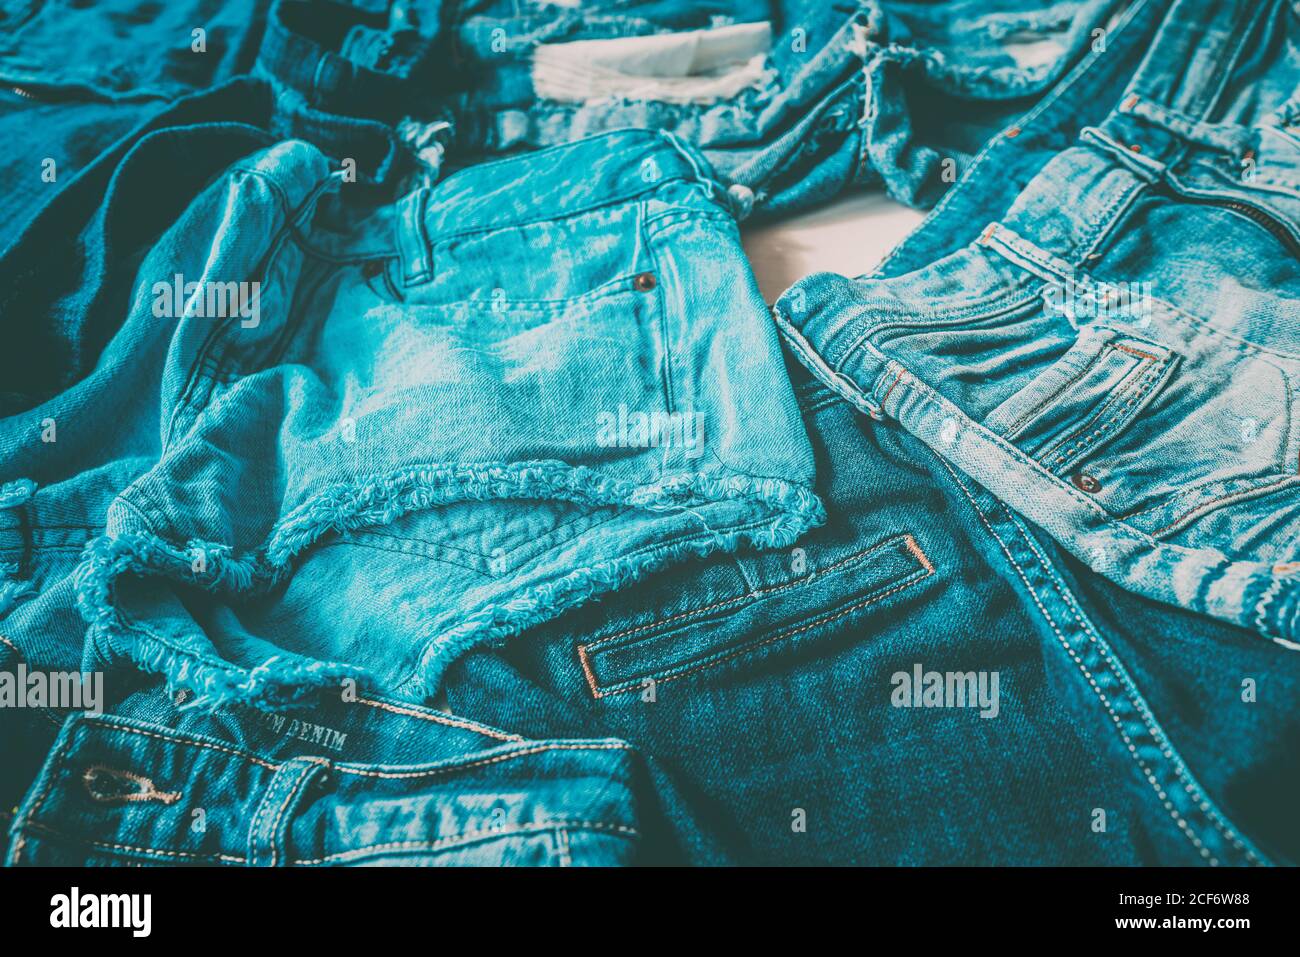 Jeans fast fashion textile industry tons of pairs of pants produced every year going to waste. Closeup of many different denim fabrics of blue indigo Stock Photo